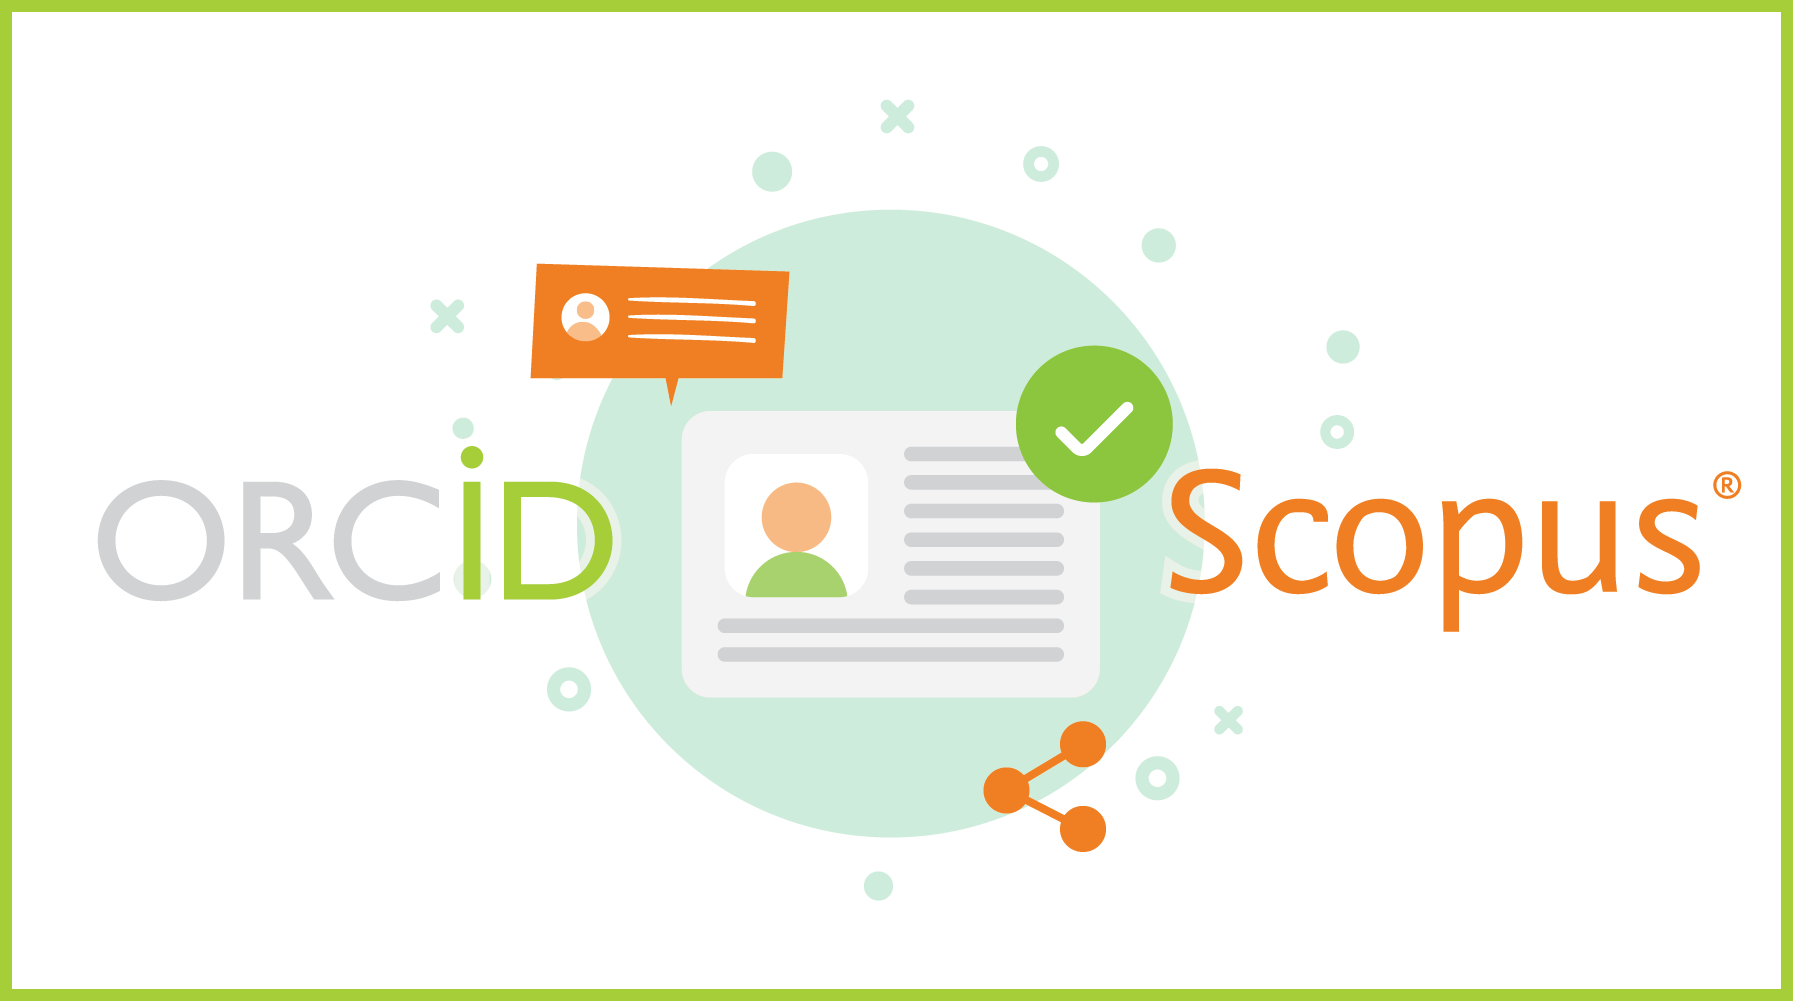 ORCID-Scopus@PolyU: Quick Guide